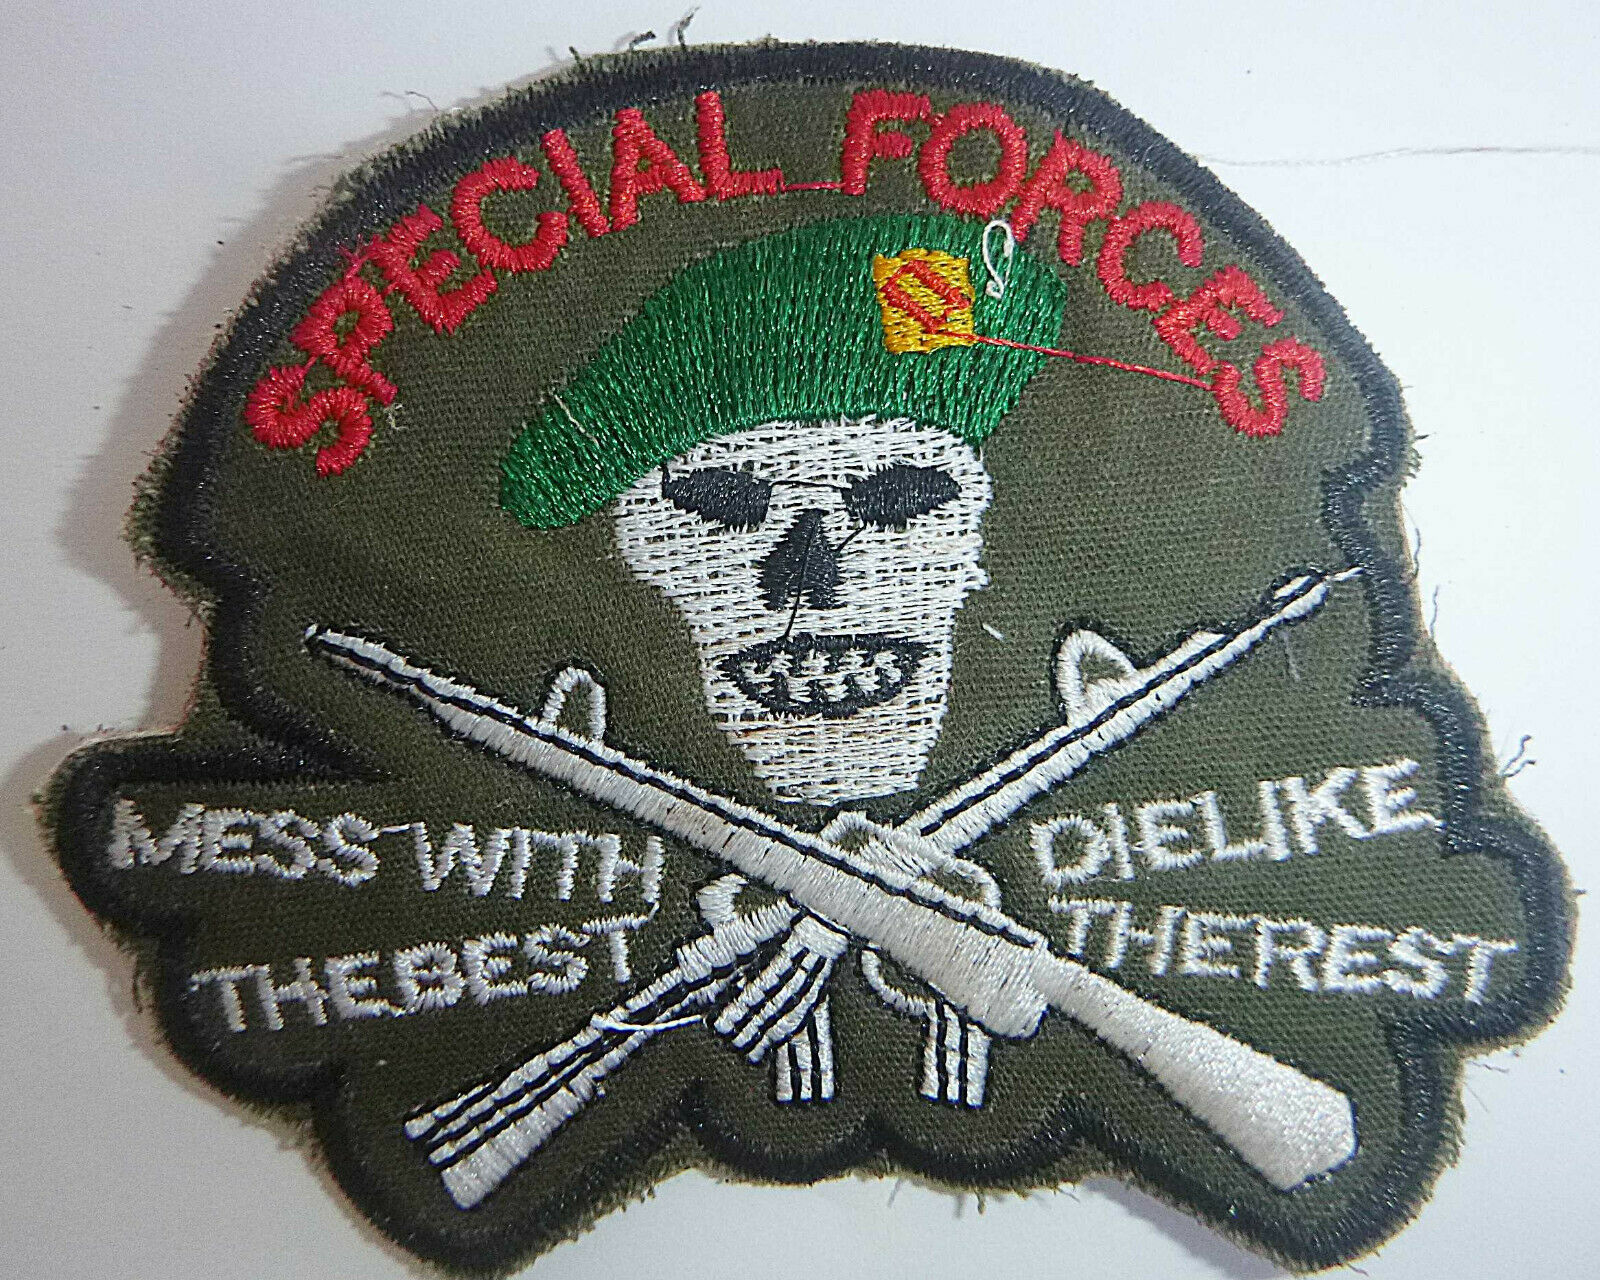 Patch - Mess With The Best - Die Like The Rest - Macv Ussf - Vietnam War - 2655